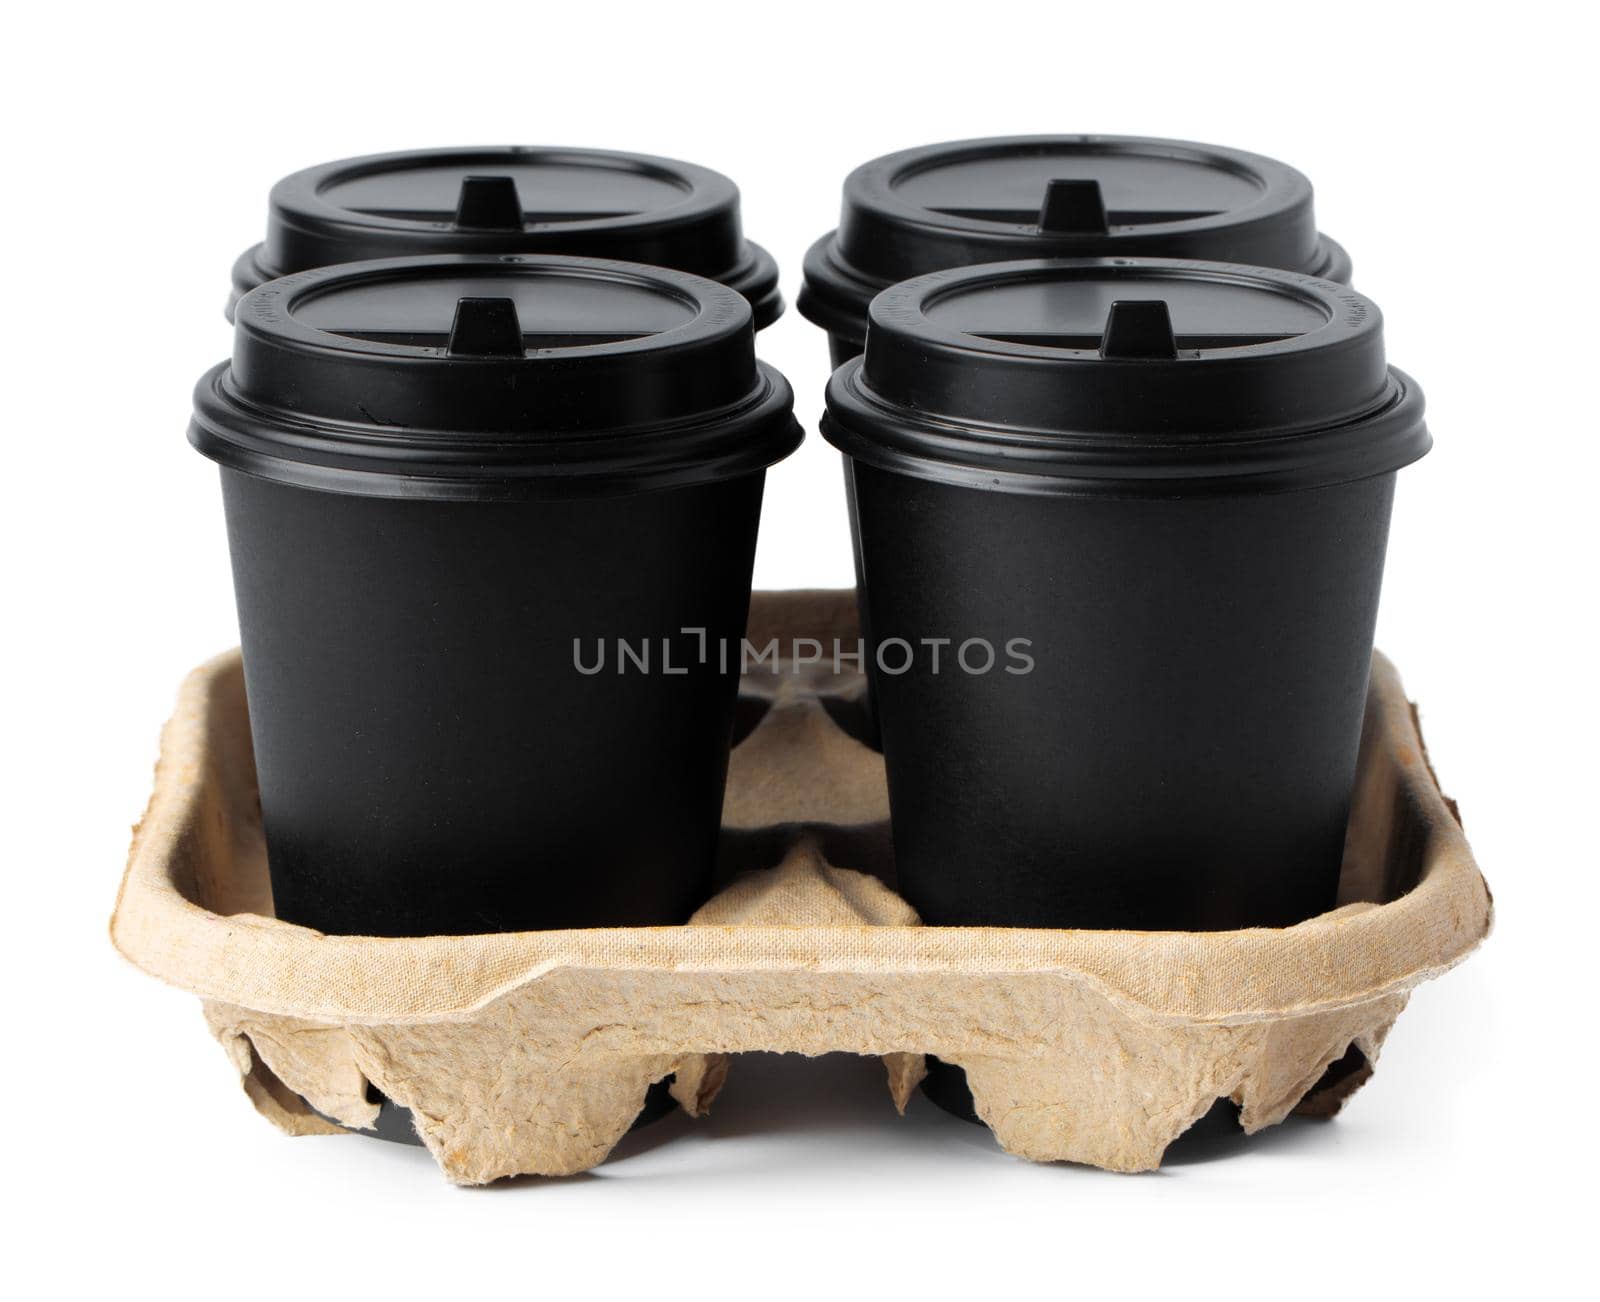 Four takeaway coffee cups in a tray isolated on white by Fabrikasimf